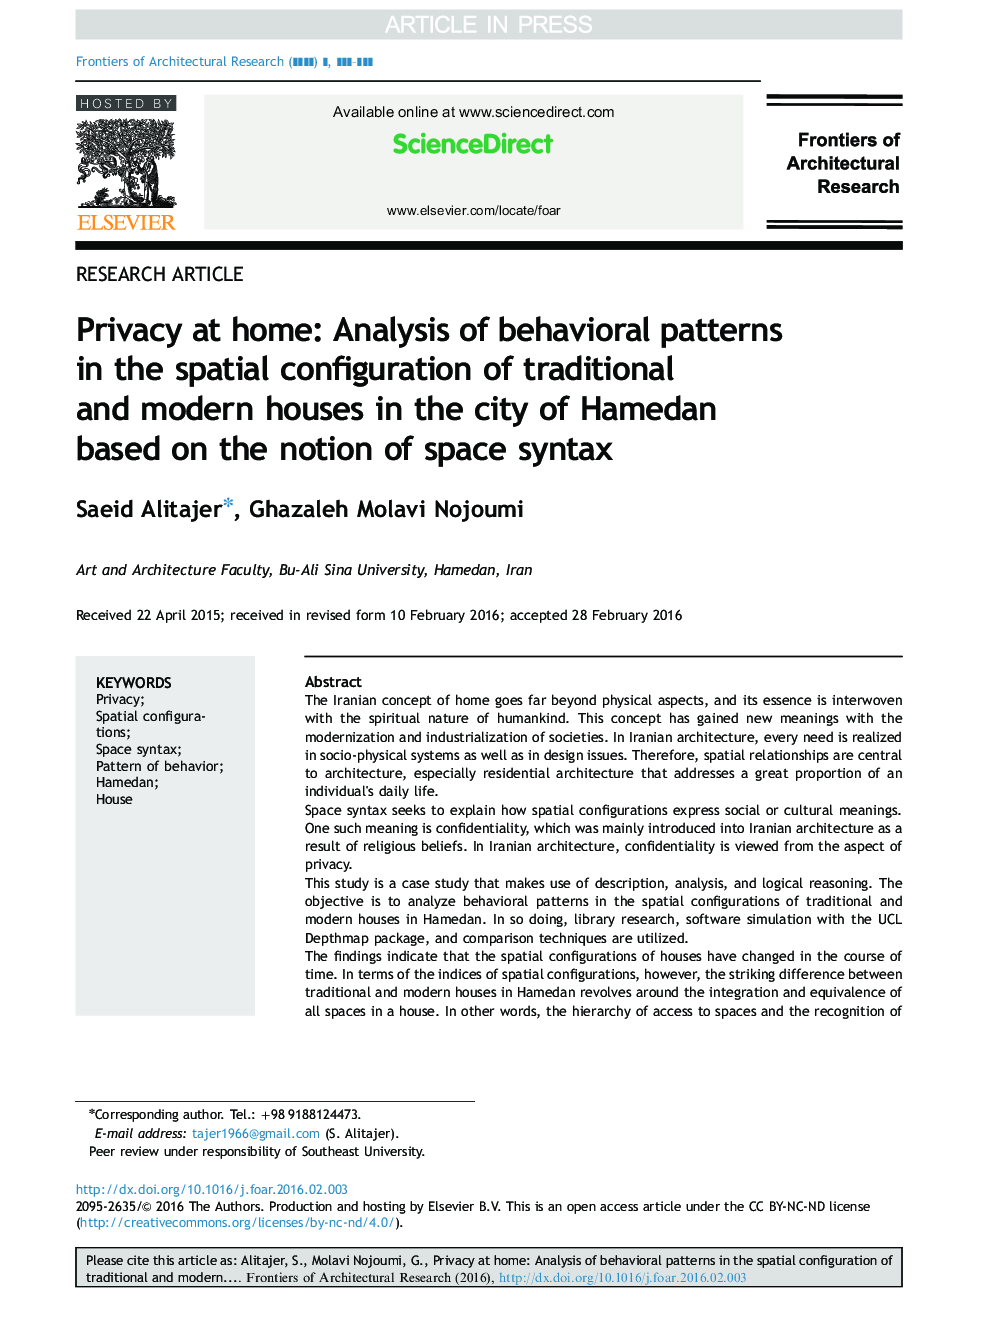 Privacy at home: Analysis of behavioral patterns in the spatial configuration of traditional and modern houses in the city of Hamedan based on the notion of space syntax